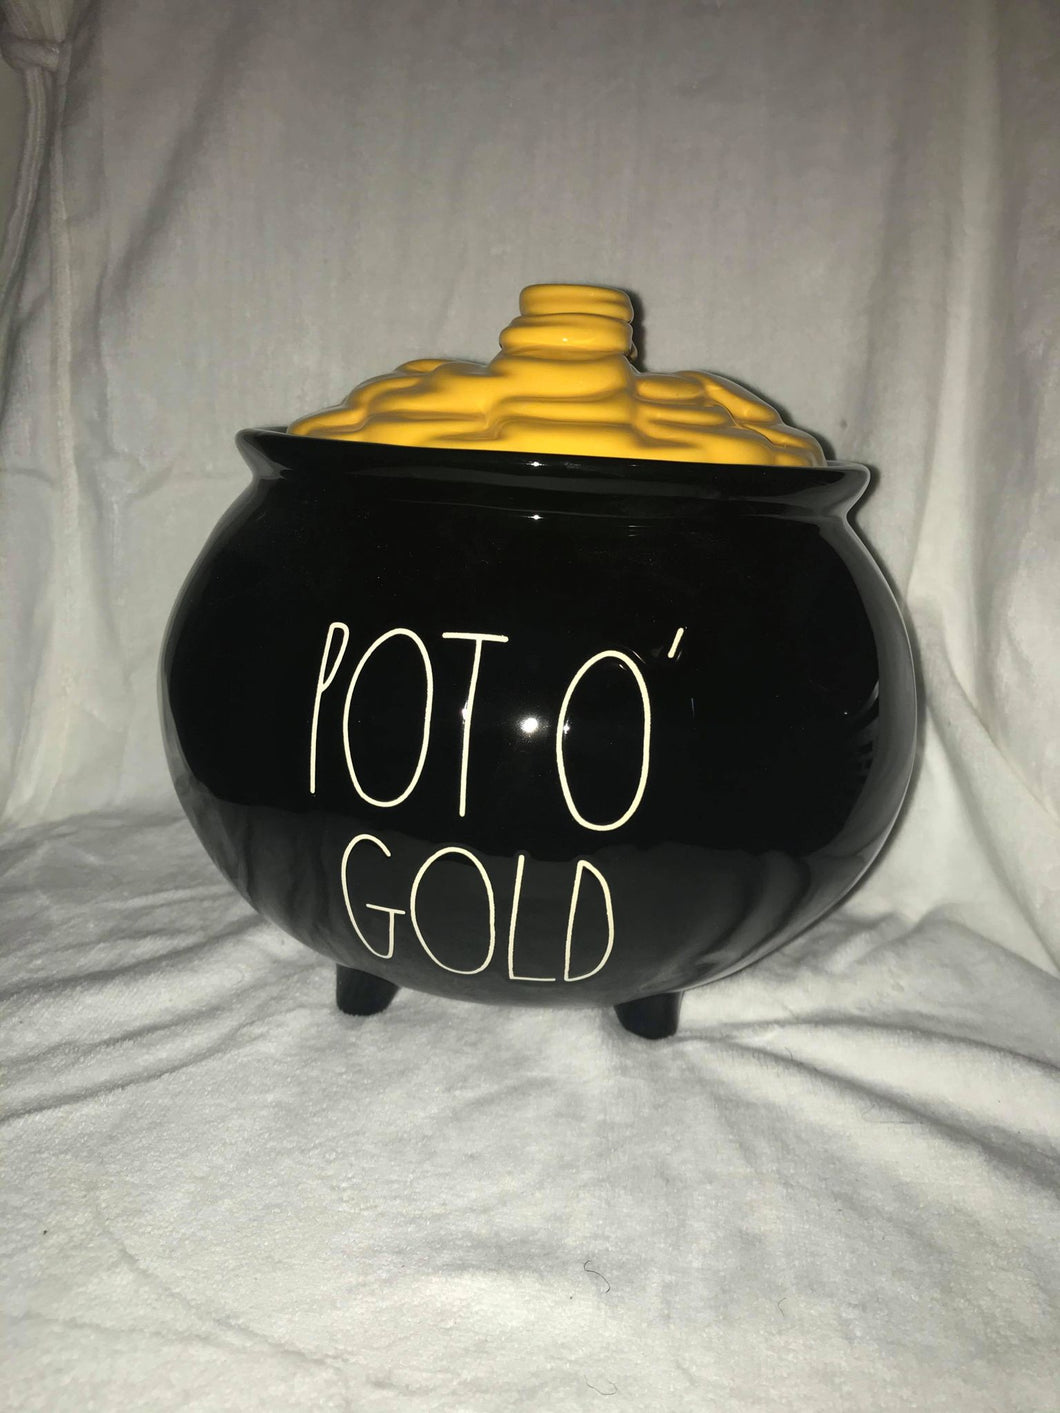 Pot o gold canister